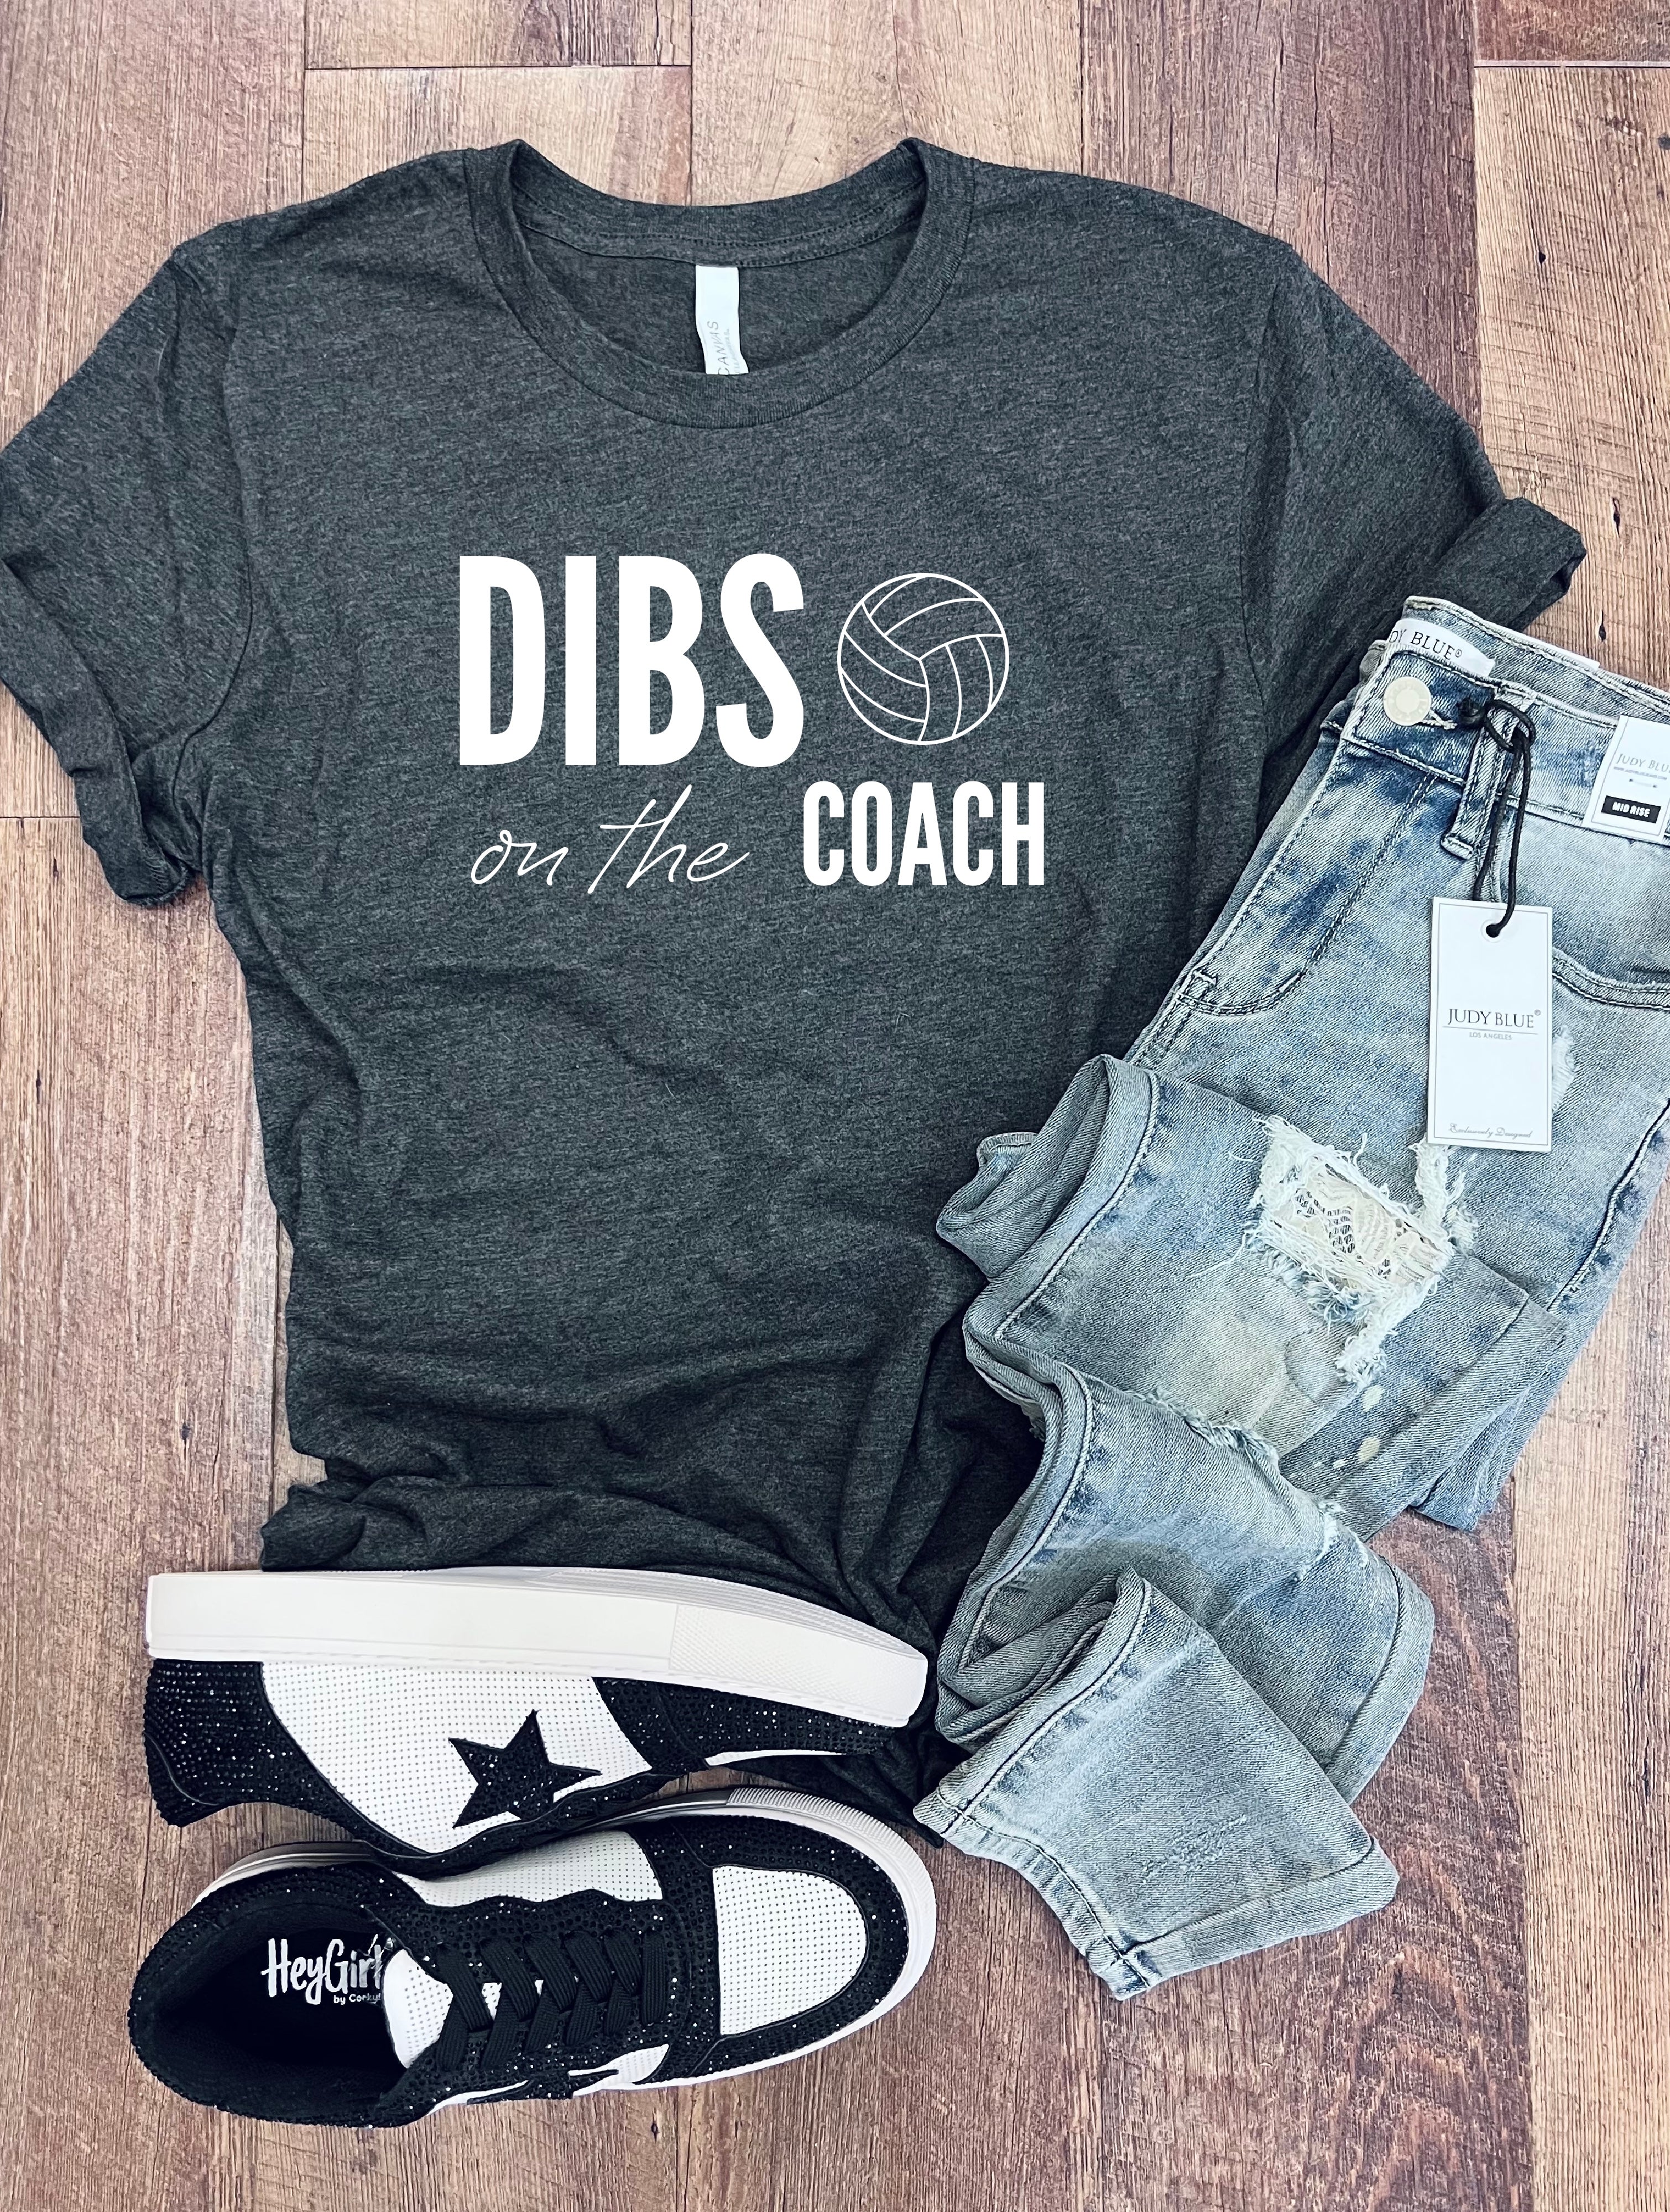 Dibs on the Coach Tee, Volleyball